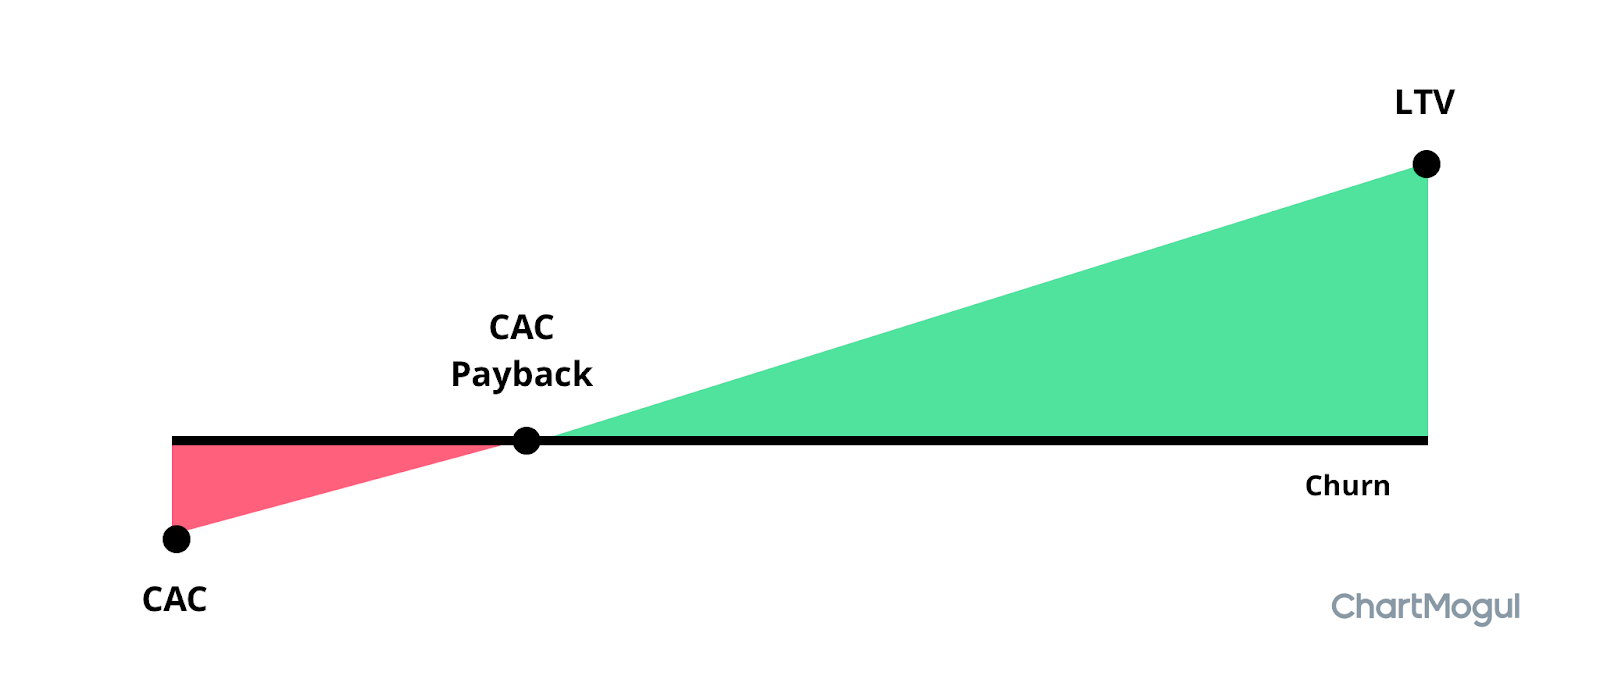 The SaaS business model relies on making up CAC over a long period and high LTV, making retention critical for success